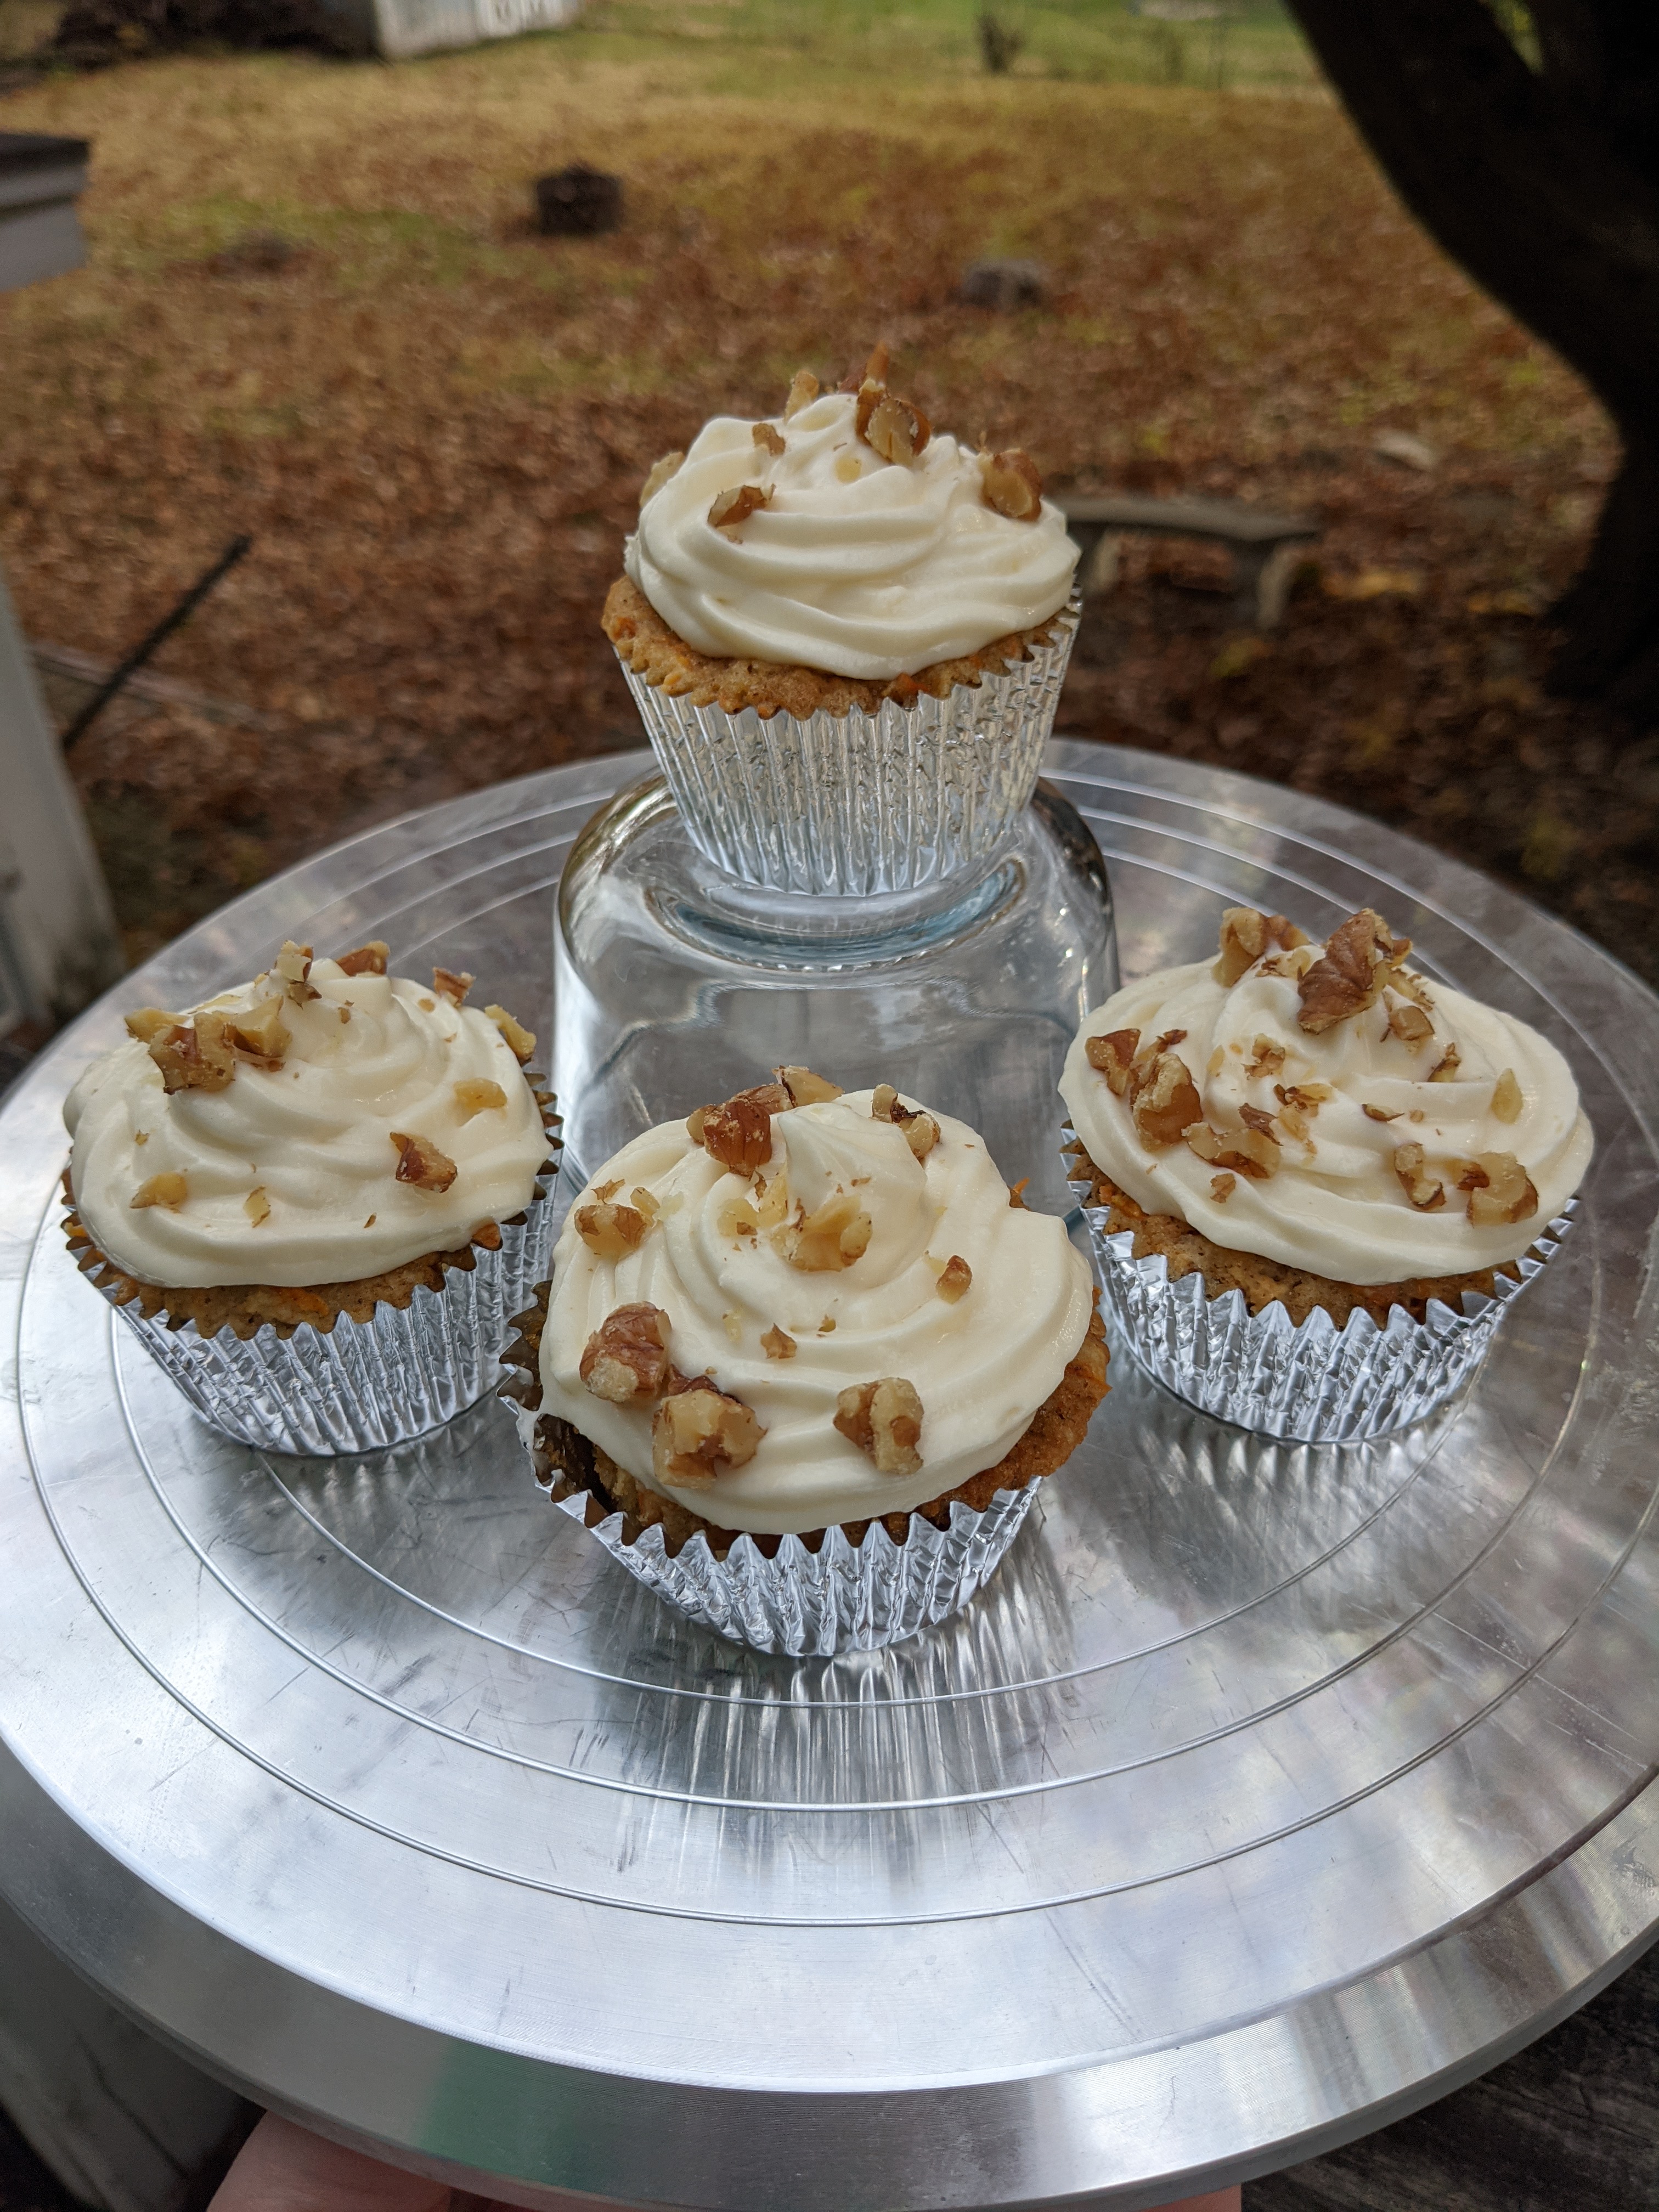 Four carrot cupcakes with walnut adornments